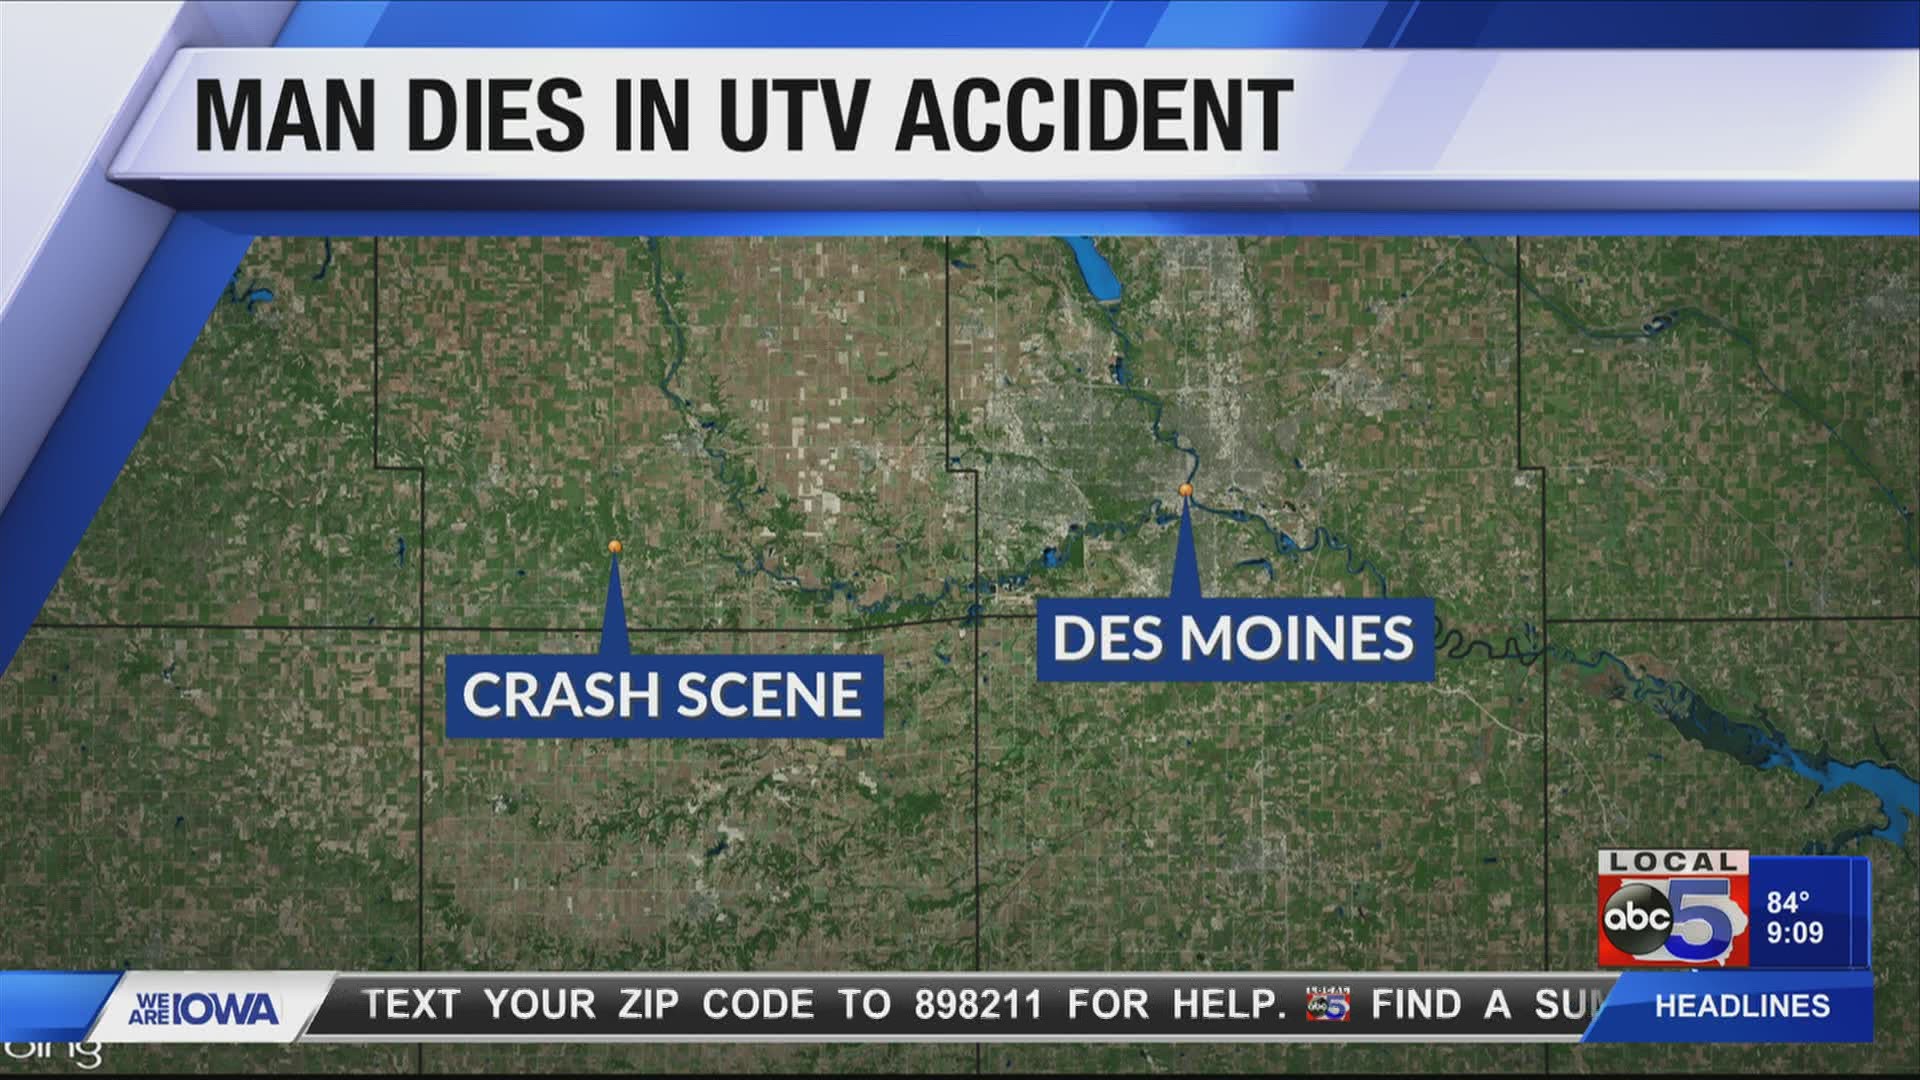 A man has died following a UTV accident in rural Dallas County, first responders said Sunday.